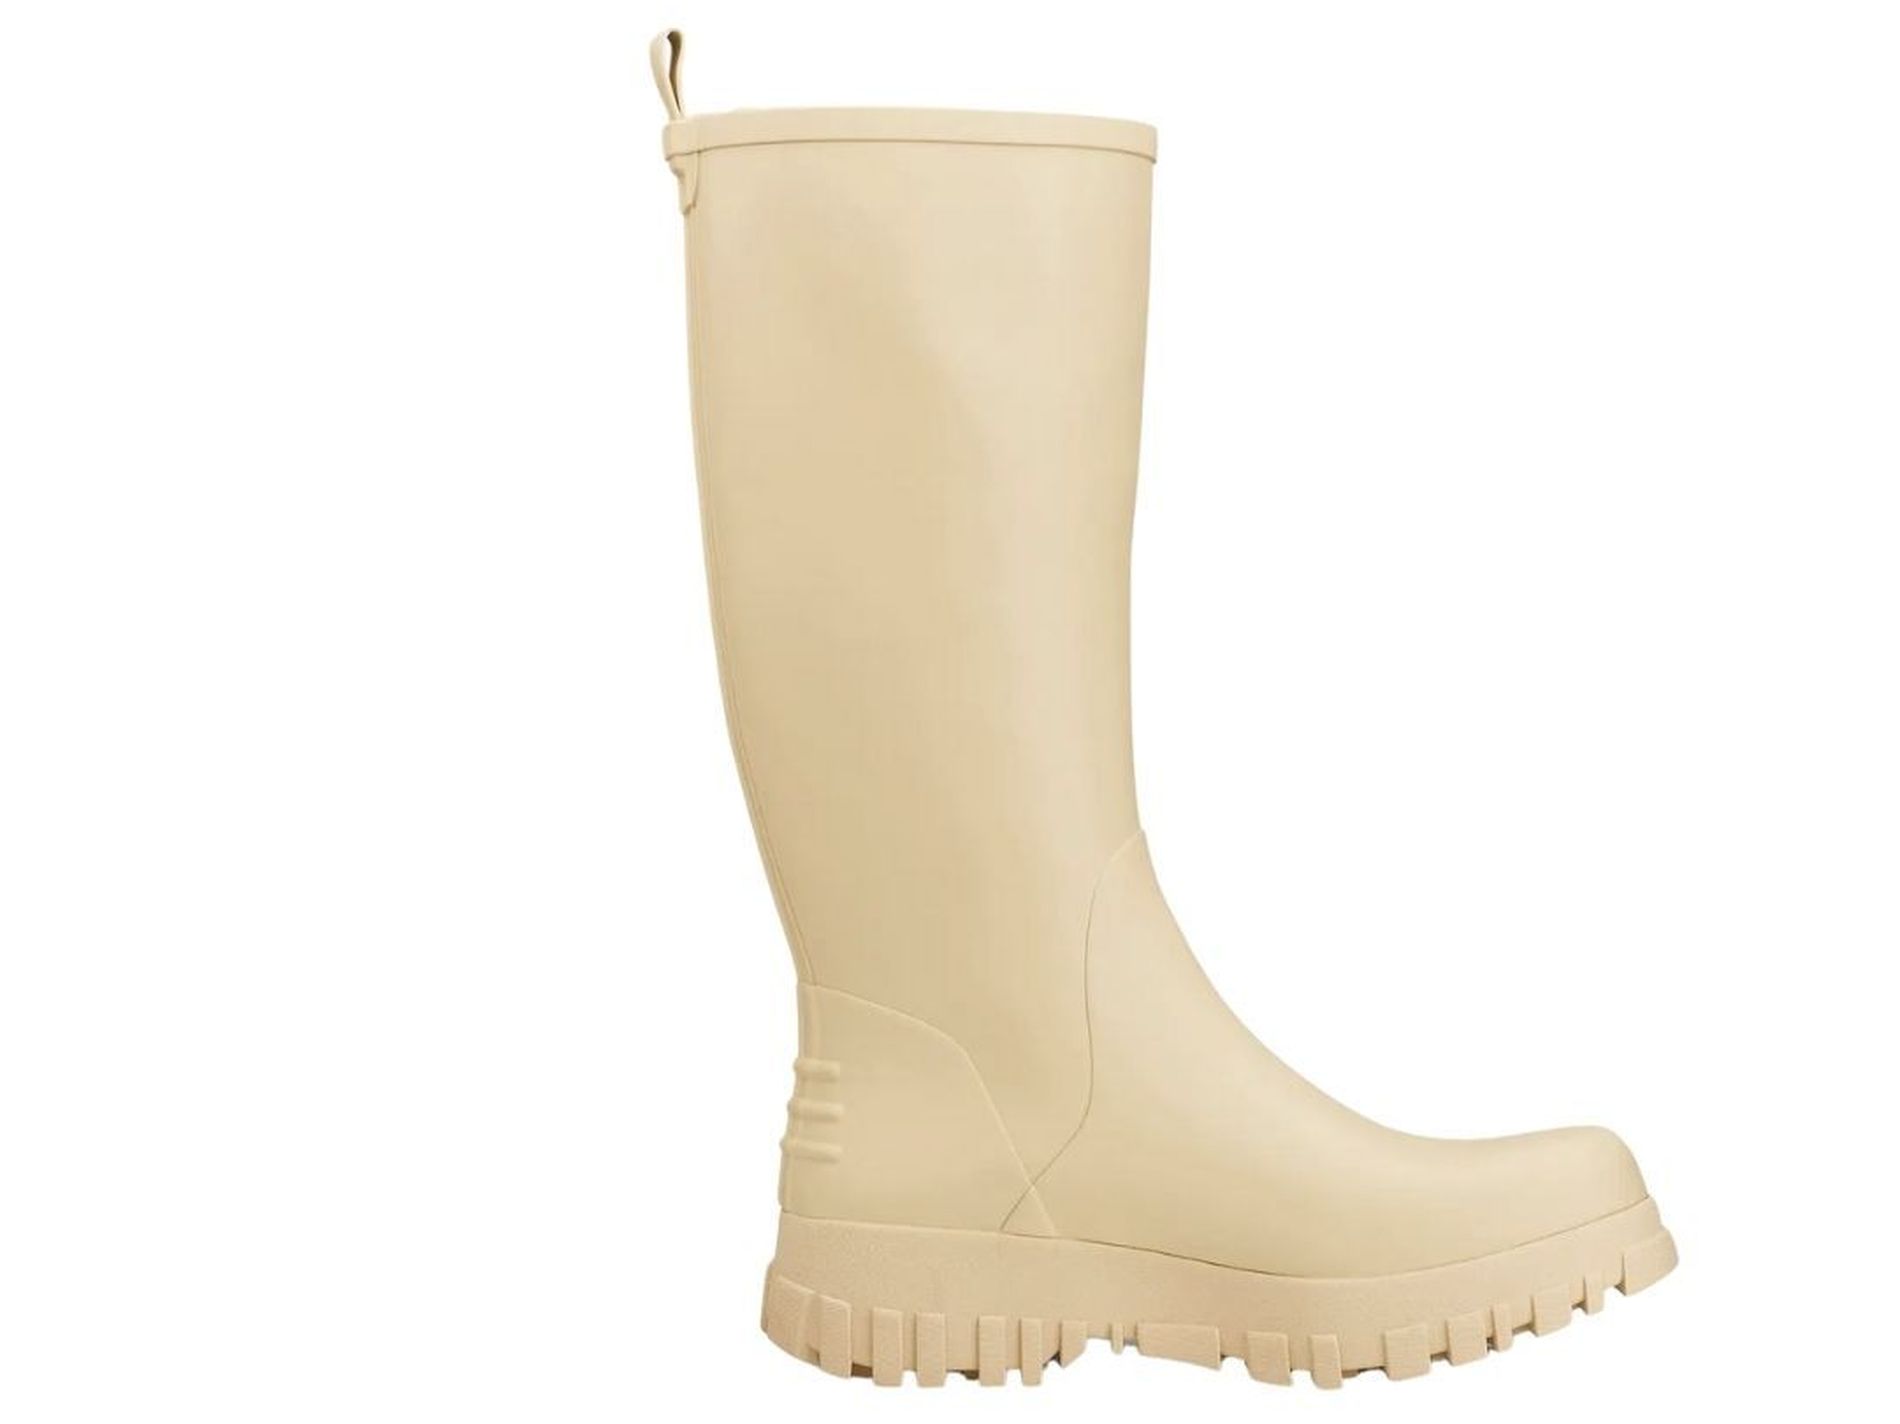 Chanel has designed the chicest rain boots for this winter